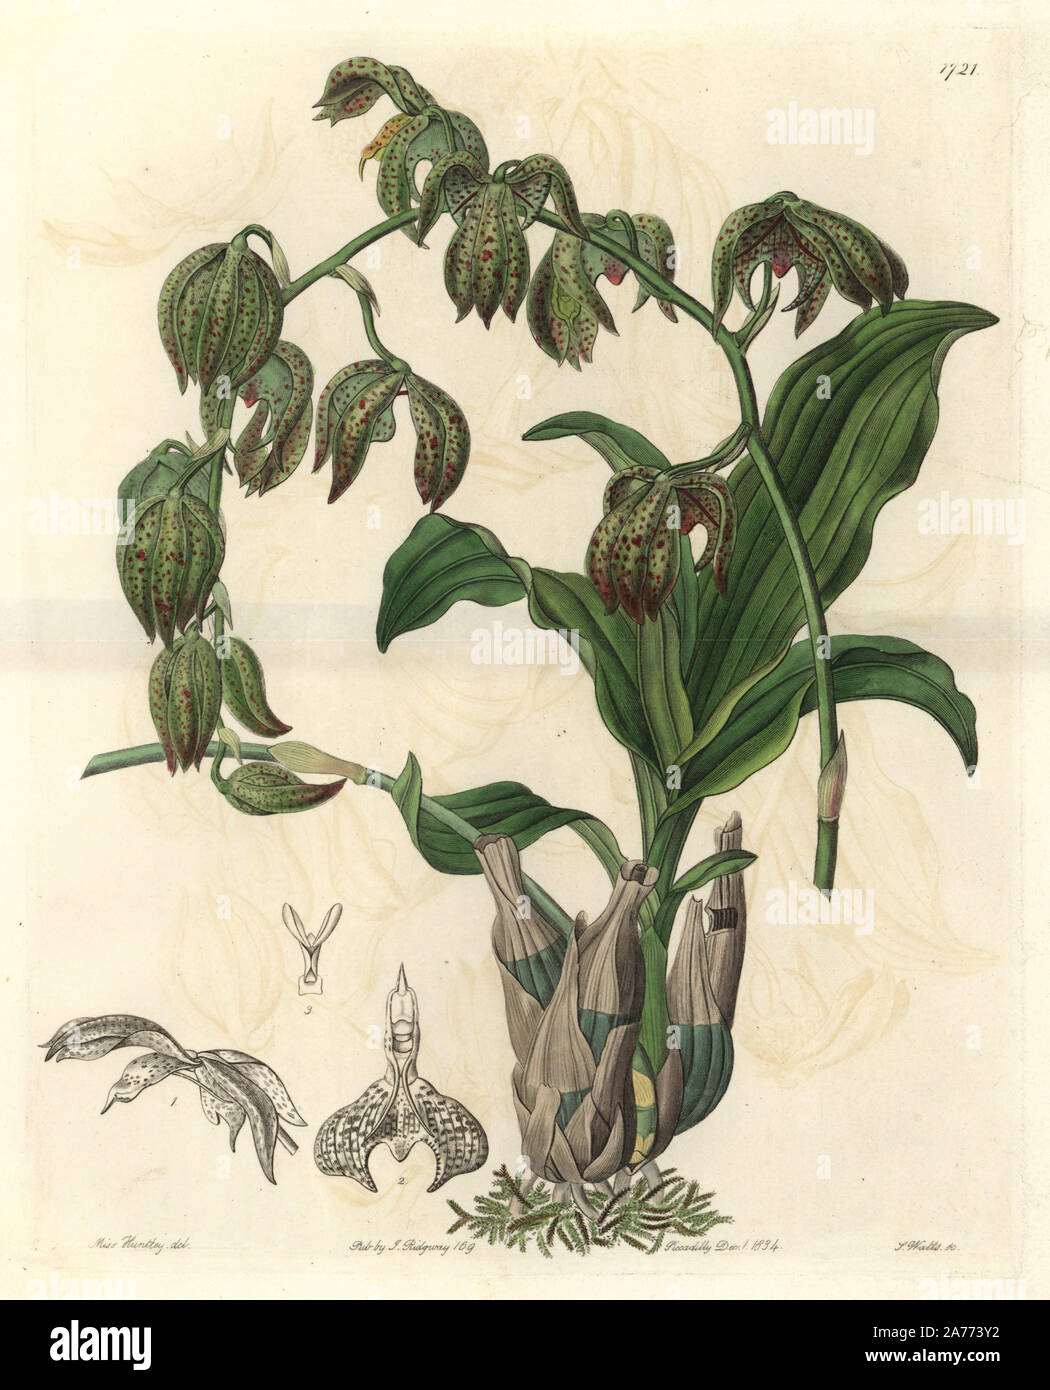 Nodding catasetum orchid, Catasetum cernuum (Drooping flywort orchid, Myanthus cernuus). Native to Brazil. Handcoloured copperplate engraving by S. Watts after an illustration by Miss M.A. Huntley from Sydenham Edwards' 'The Botanical Register,' London, Ridgway, 1834. Stock Photo